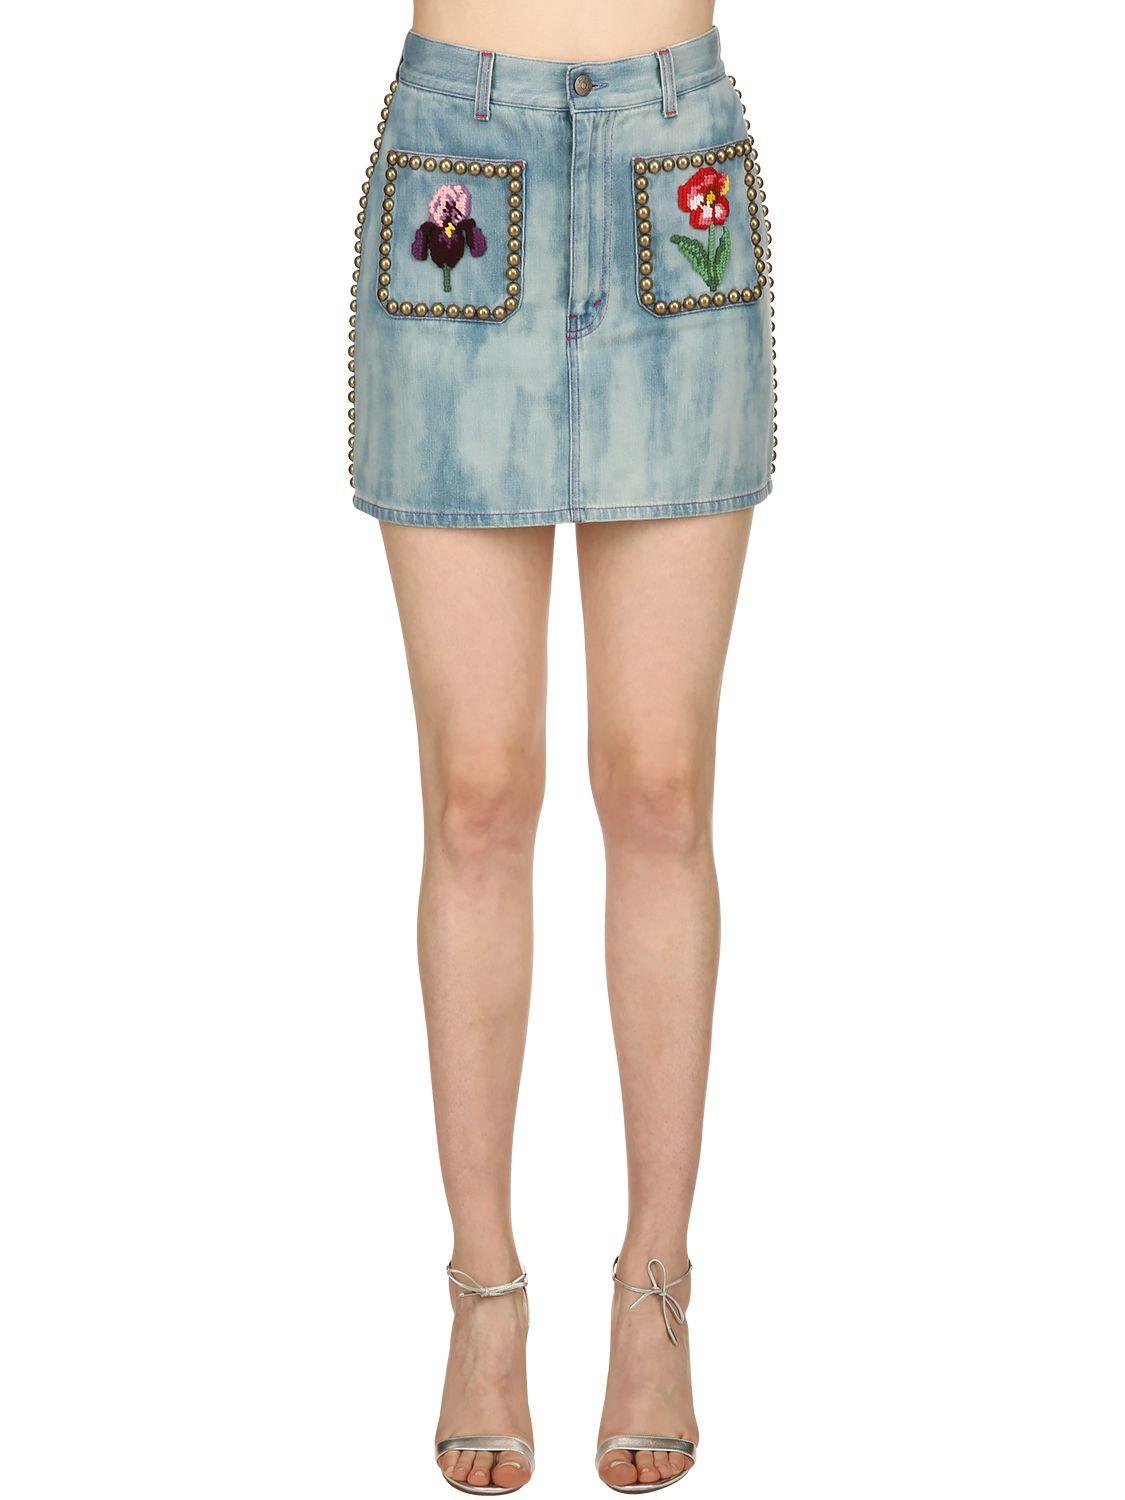 Lyst - Gucci Studded & Embroidered Cotton Denim Skirt in Blue